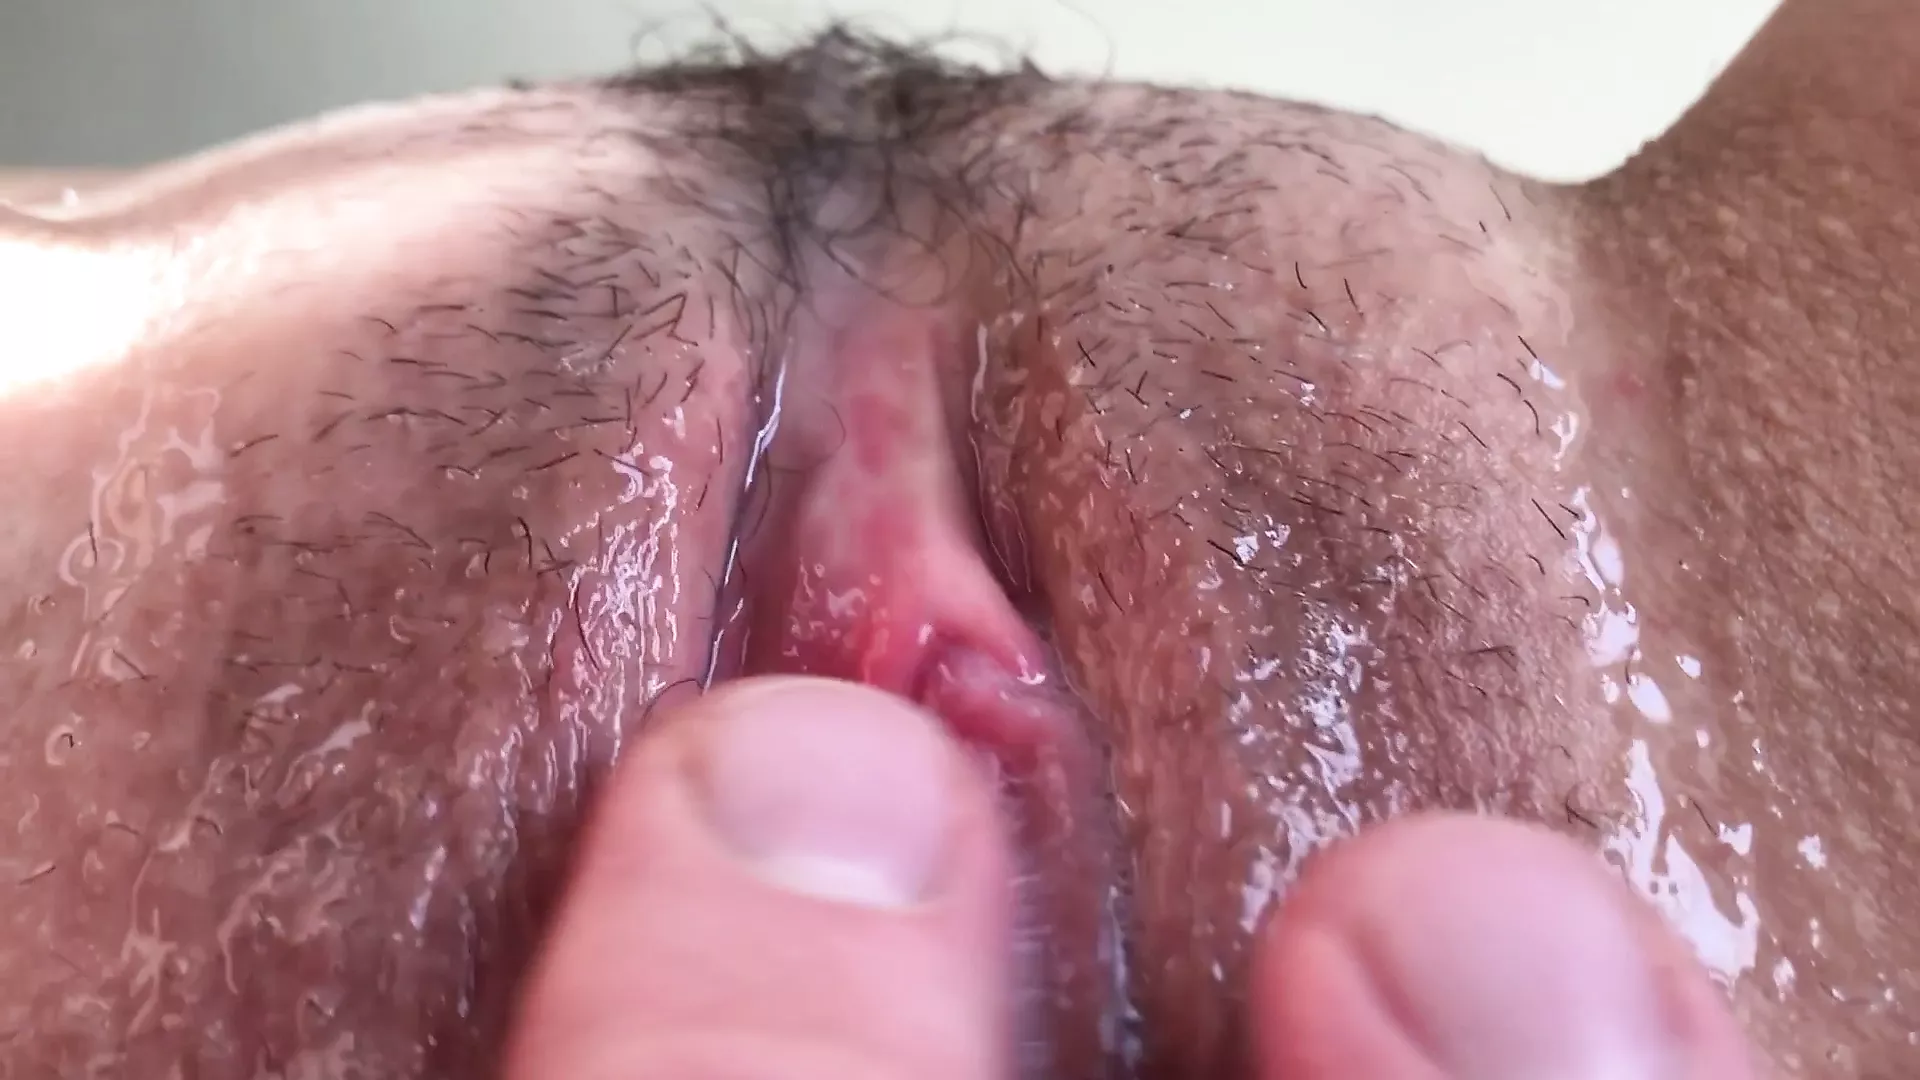 He was slow and gentle... Close-up. Cunnilingus. Rubbing a cock on the clitoris. Pussy fuck pic